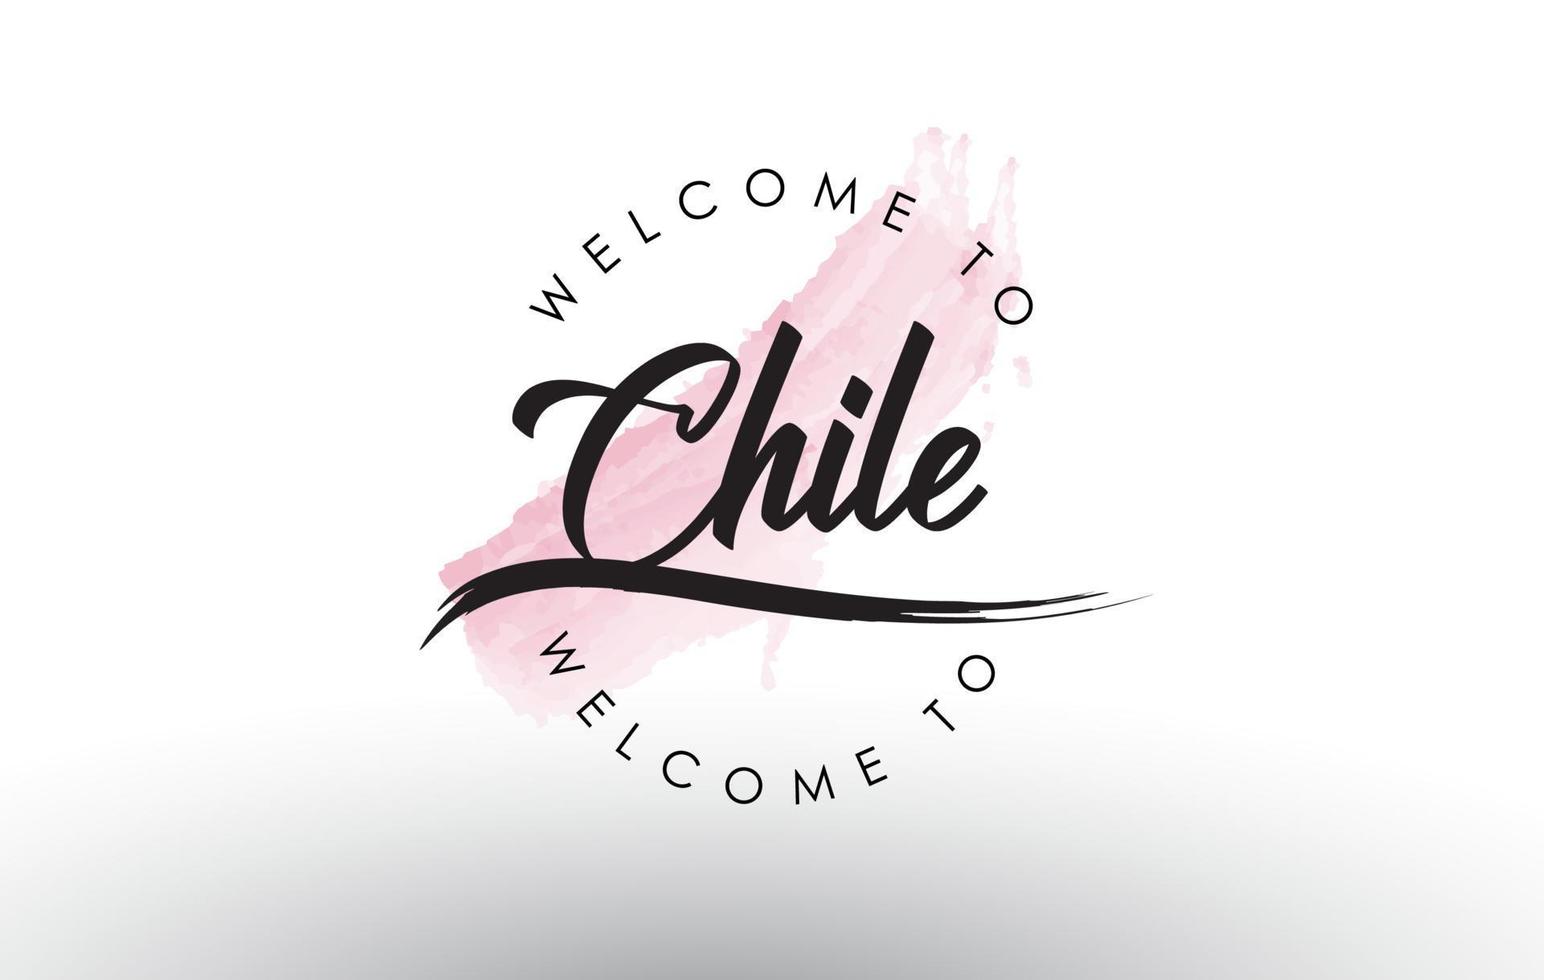 Chile Welcome to Text with Watercolor Pink Brush Stroke vector